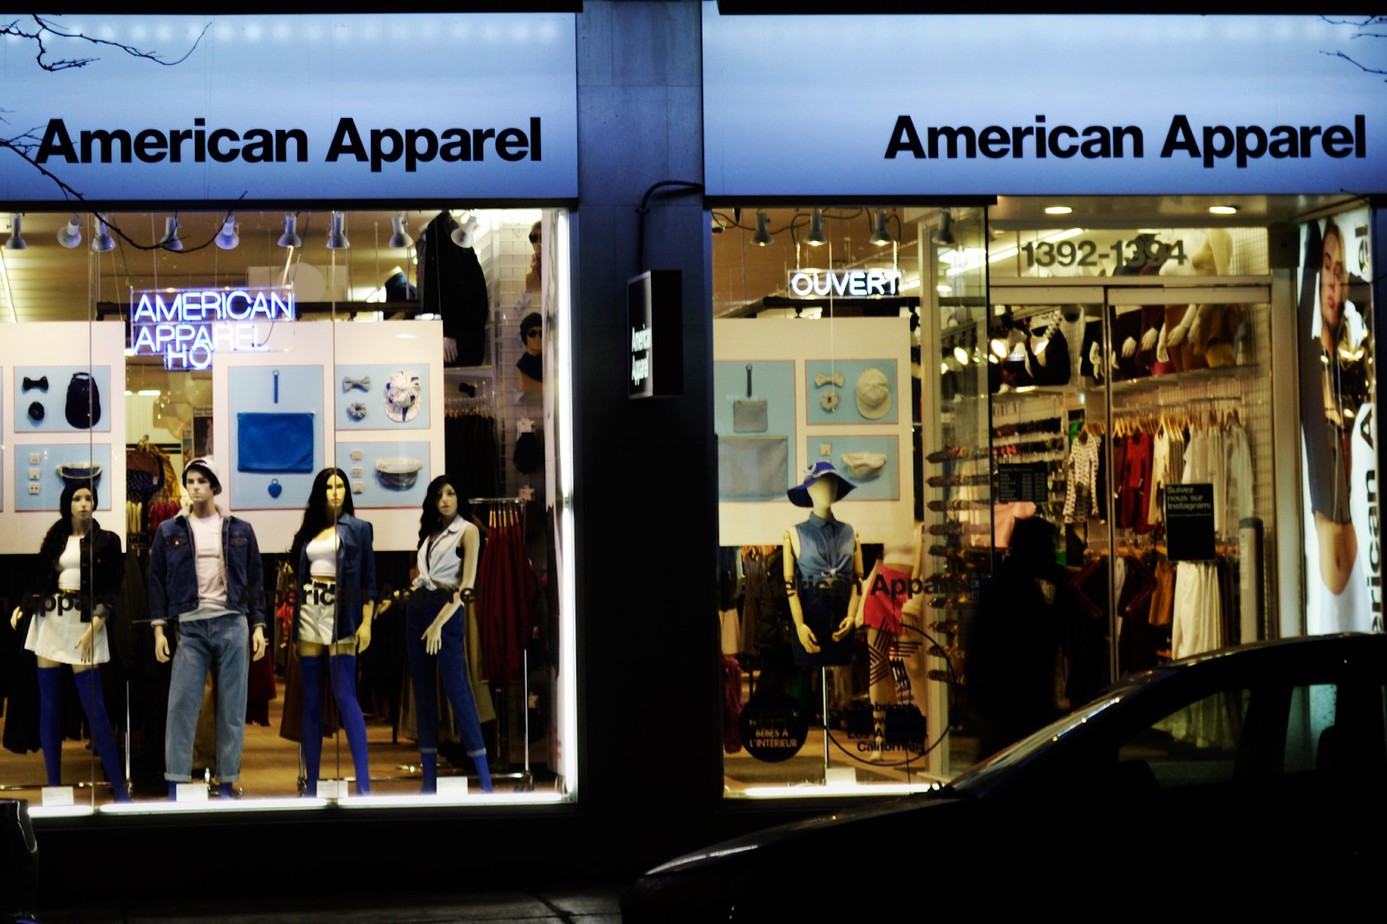 American Apparel - easiest way to make a statement about yourself without uttering a single word